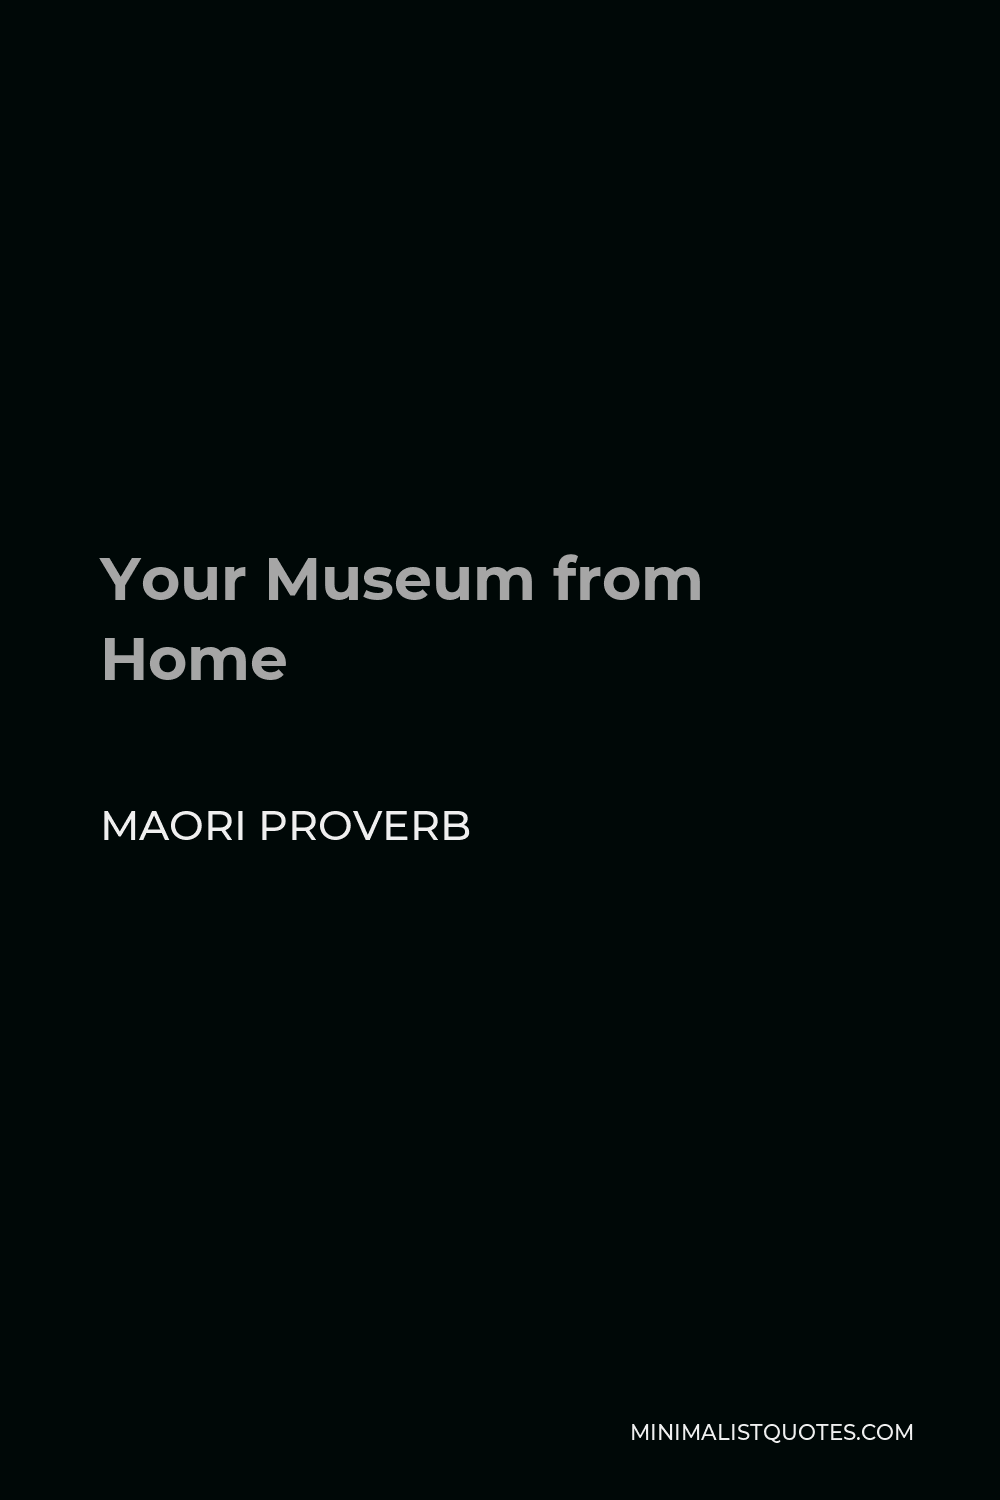 Maori Proverb Quote - Your Museum from Home